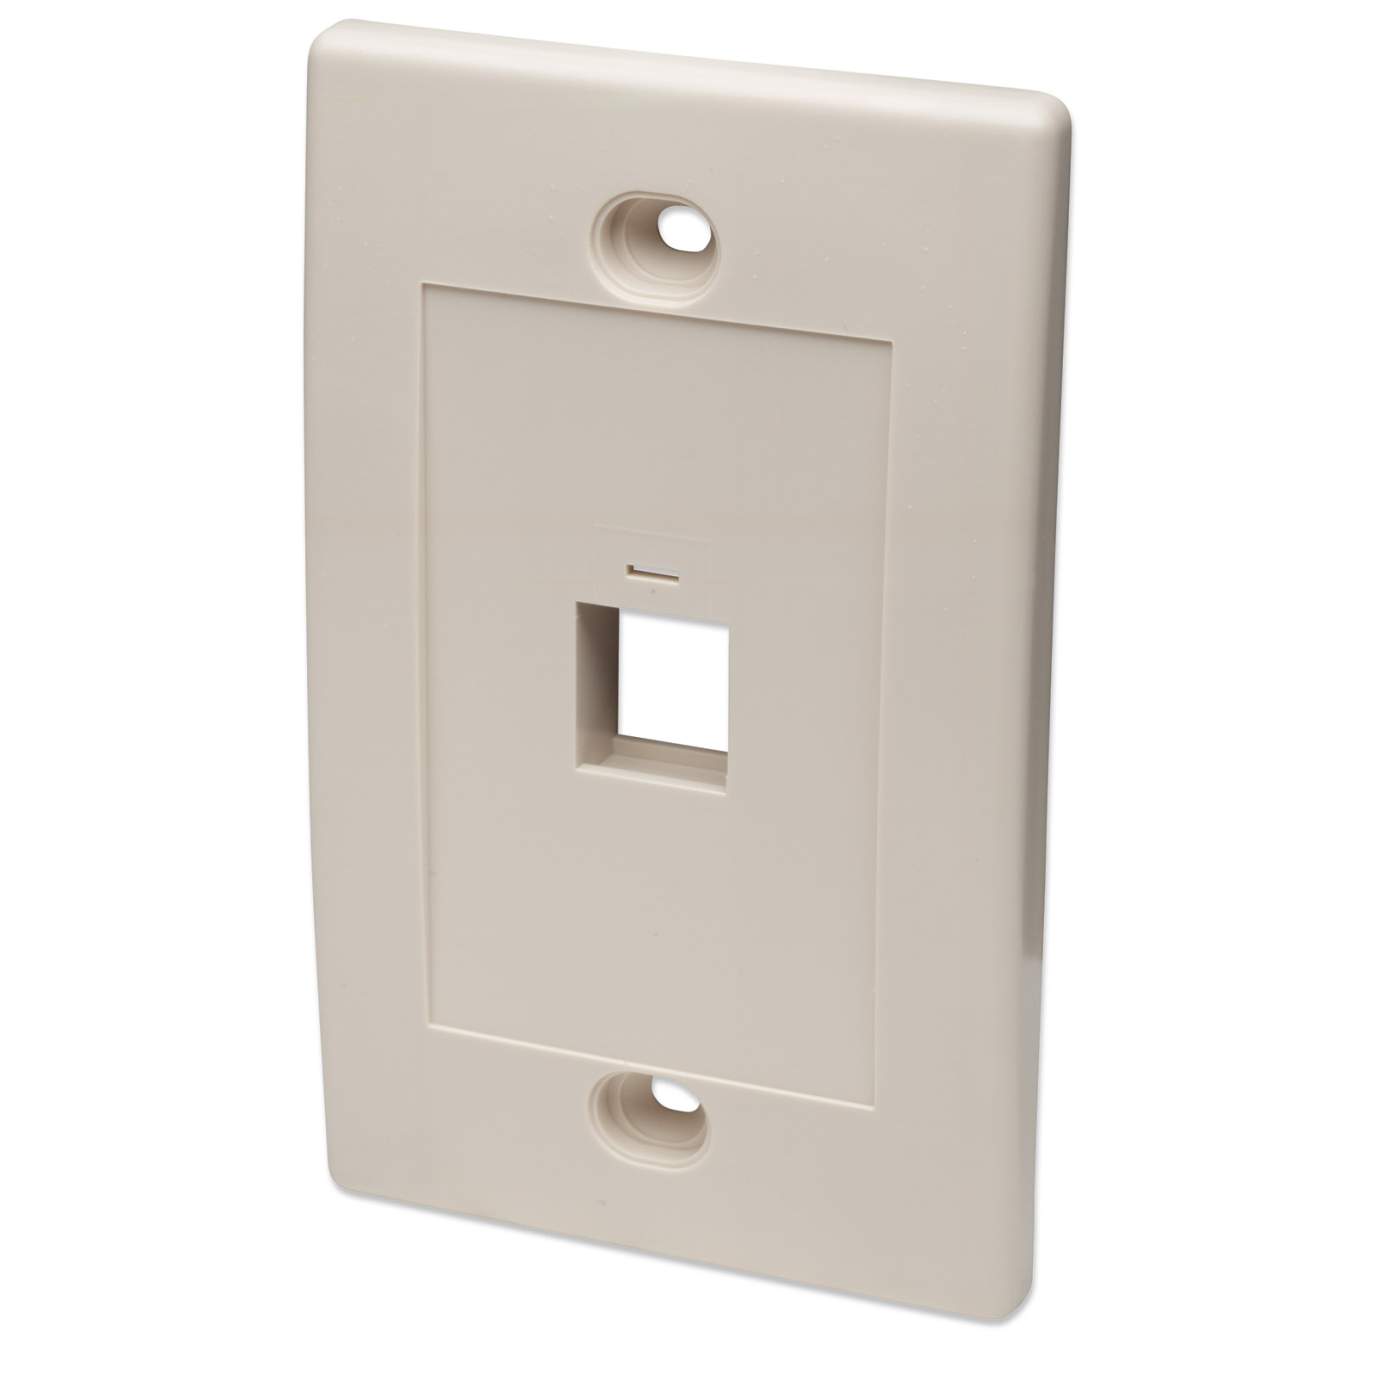 1-Outlet Keystone Wall Plate Image 1